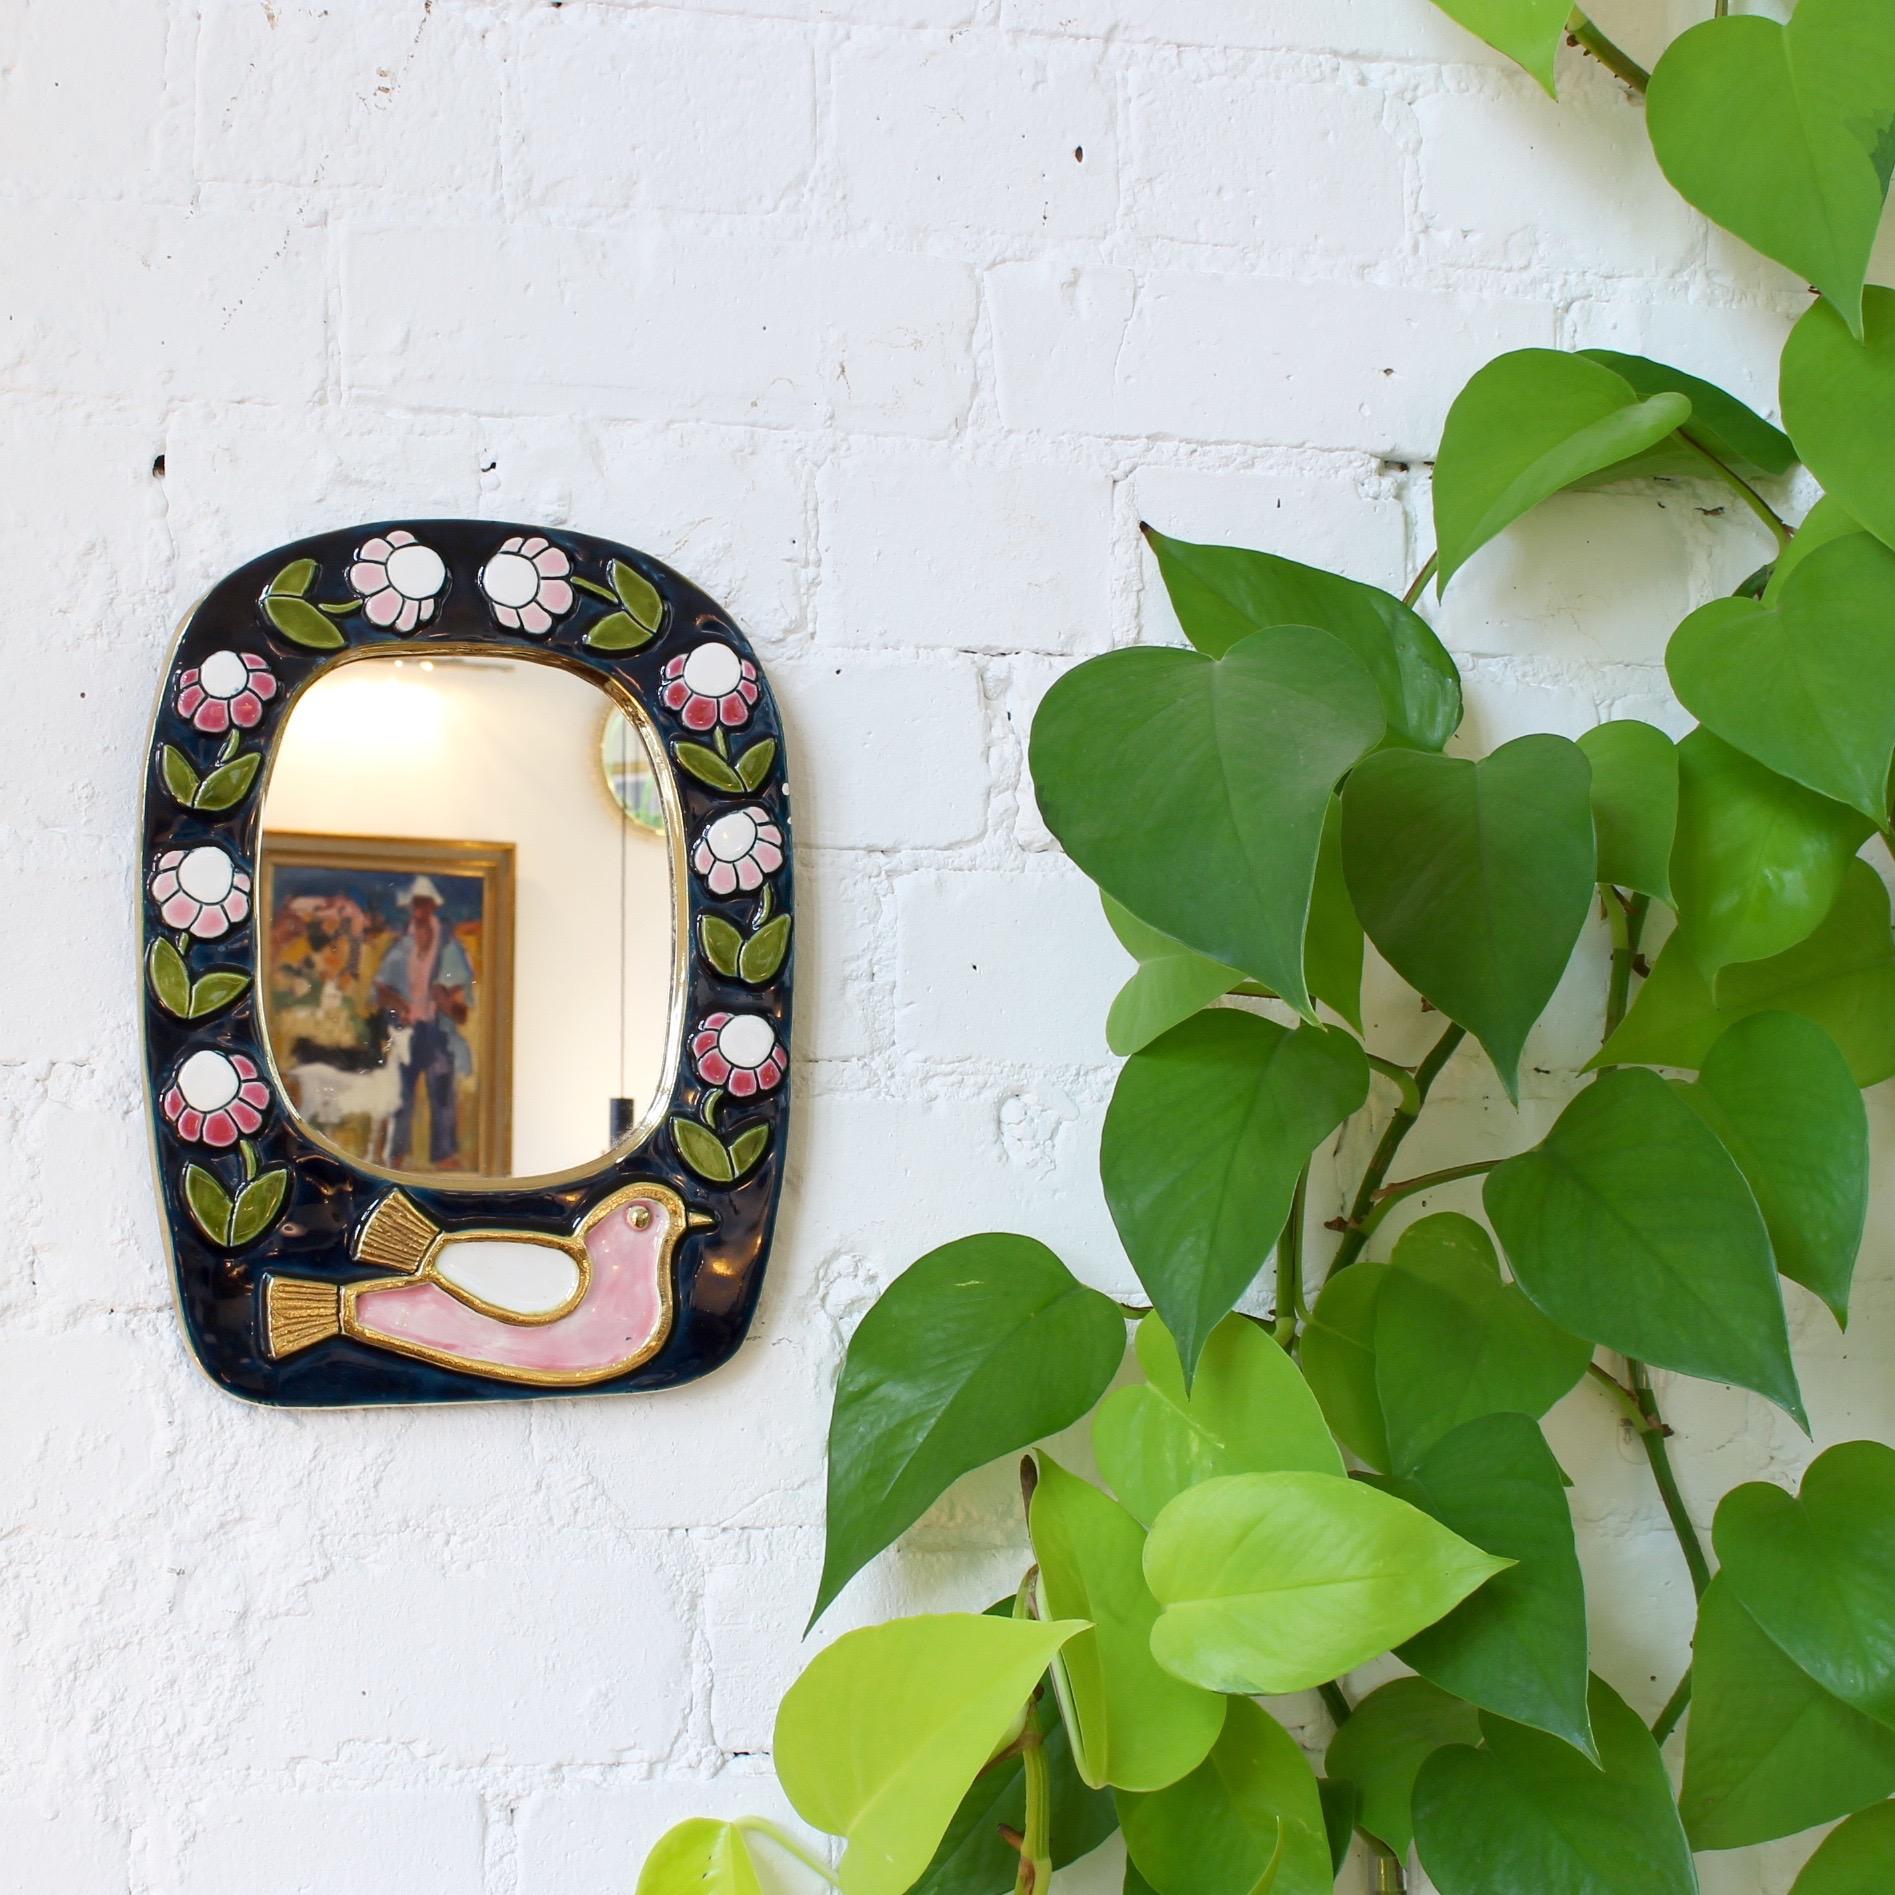 Glazed Ceramic Wall Mirror with Flower Motif and Stylised Bird by François Lembo, 1970s